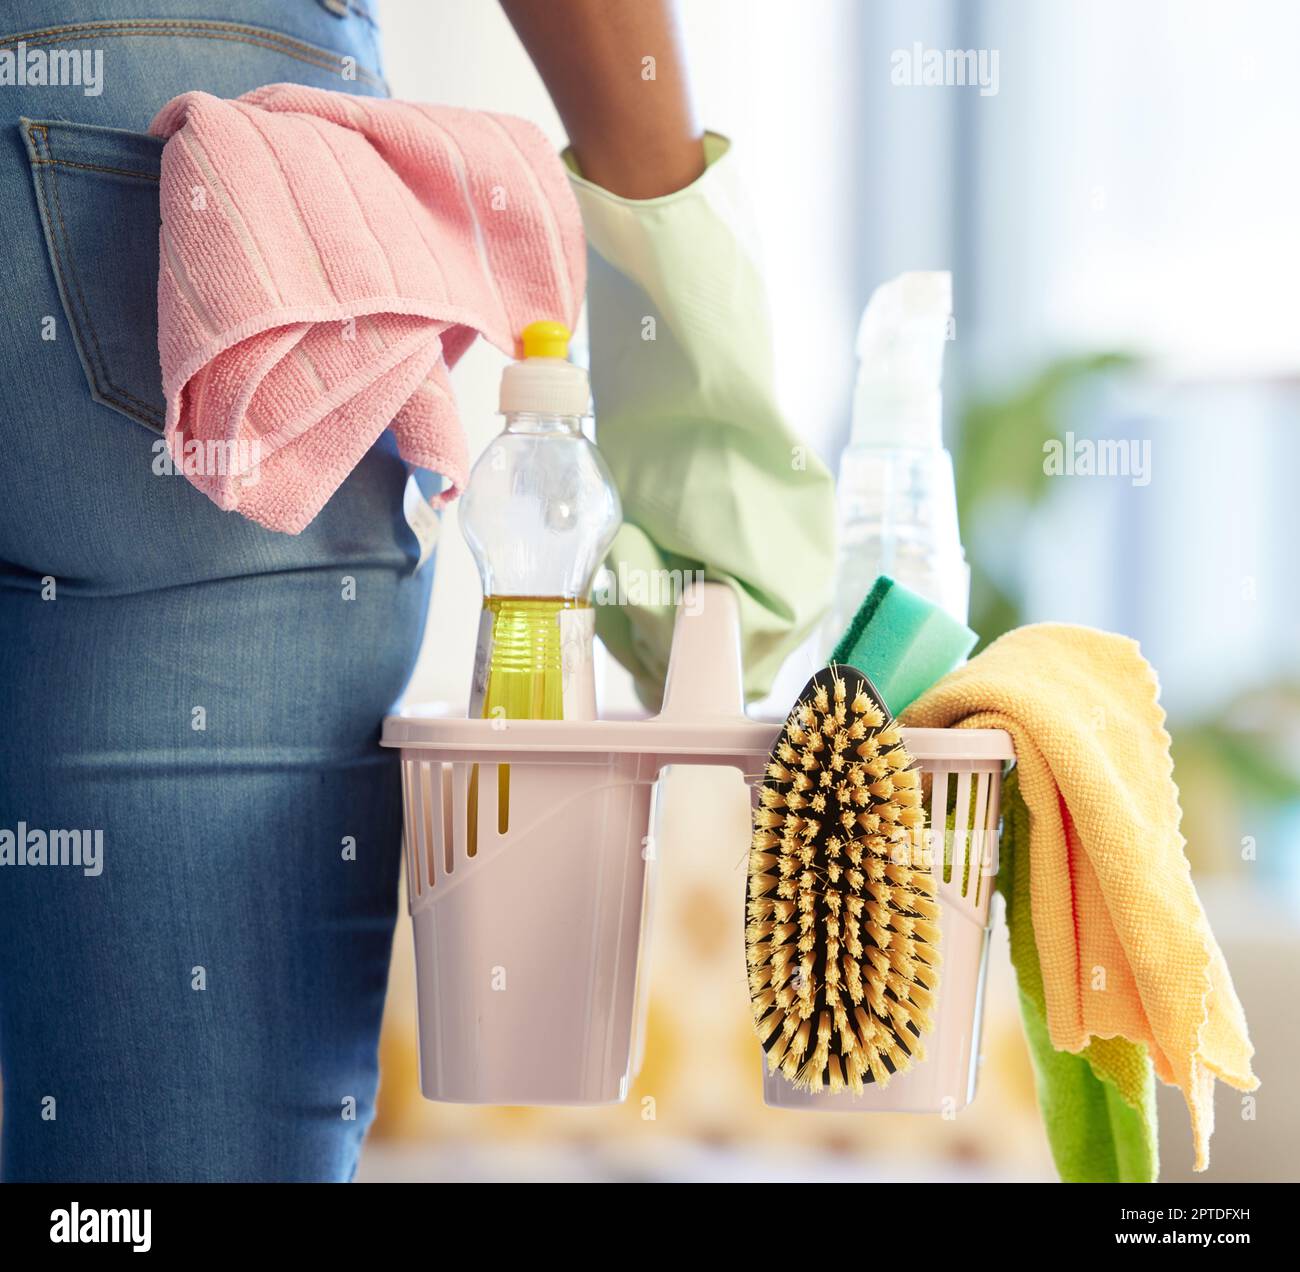 Hand, cleaning products and home supplies for house cleaning